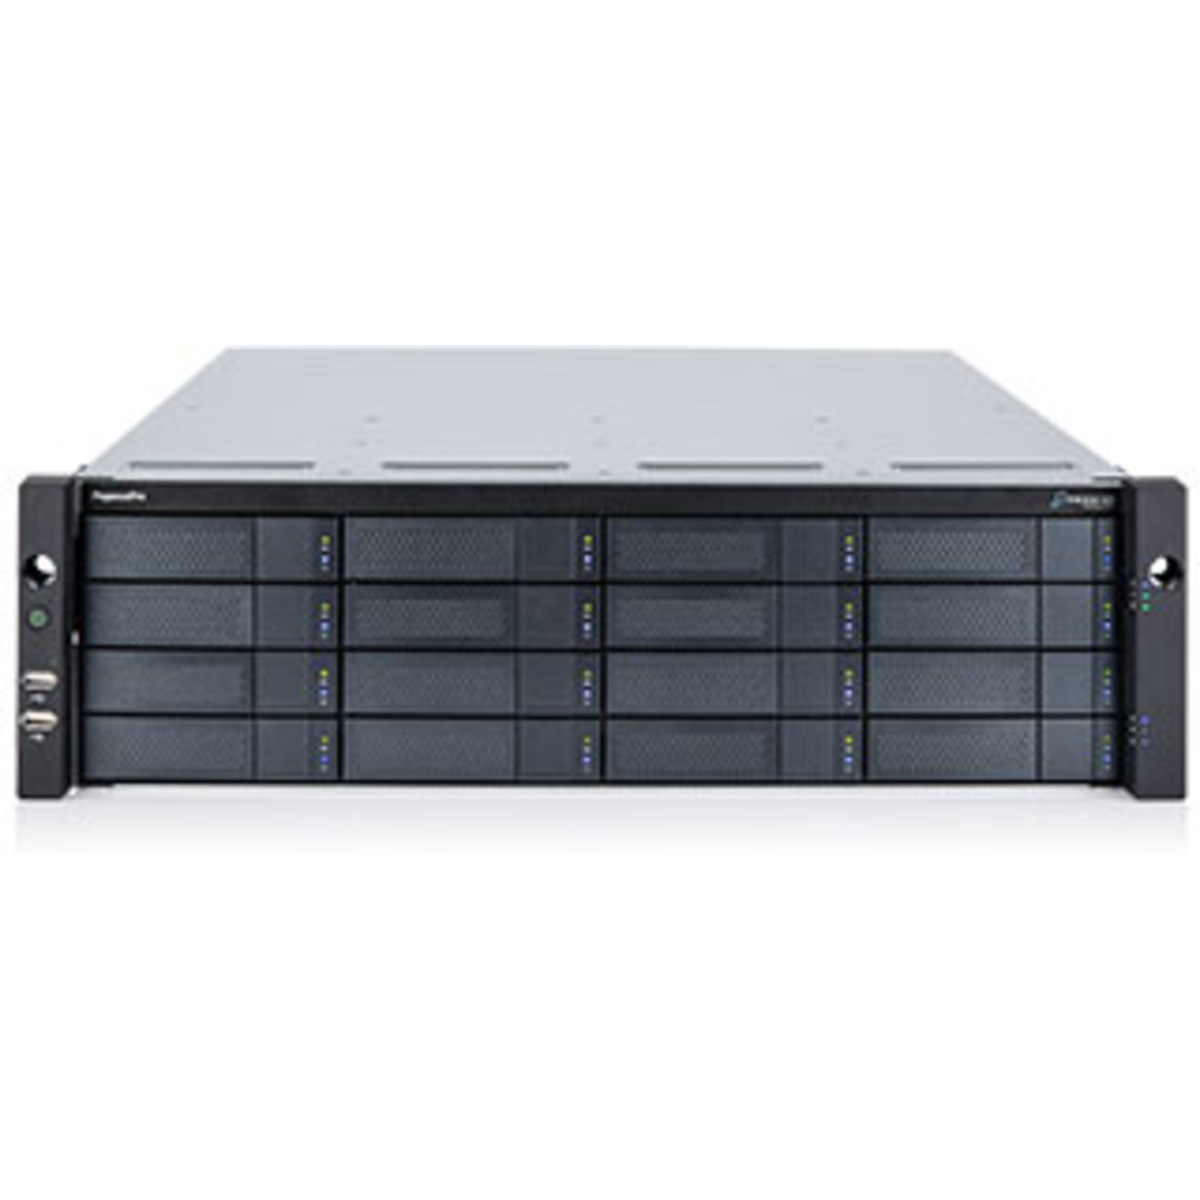 Promise Technology PegasusPro R16 44tb 16-Bay RackMount Multimedia / Power User / Business DAS-NAS - Combo Direct + Network Storage Device 11x4tb Western Digital Ultrastar DC HC310 HUS726T4TALE6L4 3.5 7200rpm SATA 6Gb/s HDD ENTERPRISE Class Drives Installed - Burn-In Tested PegasusPro R16